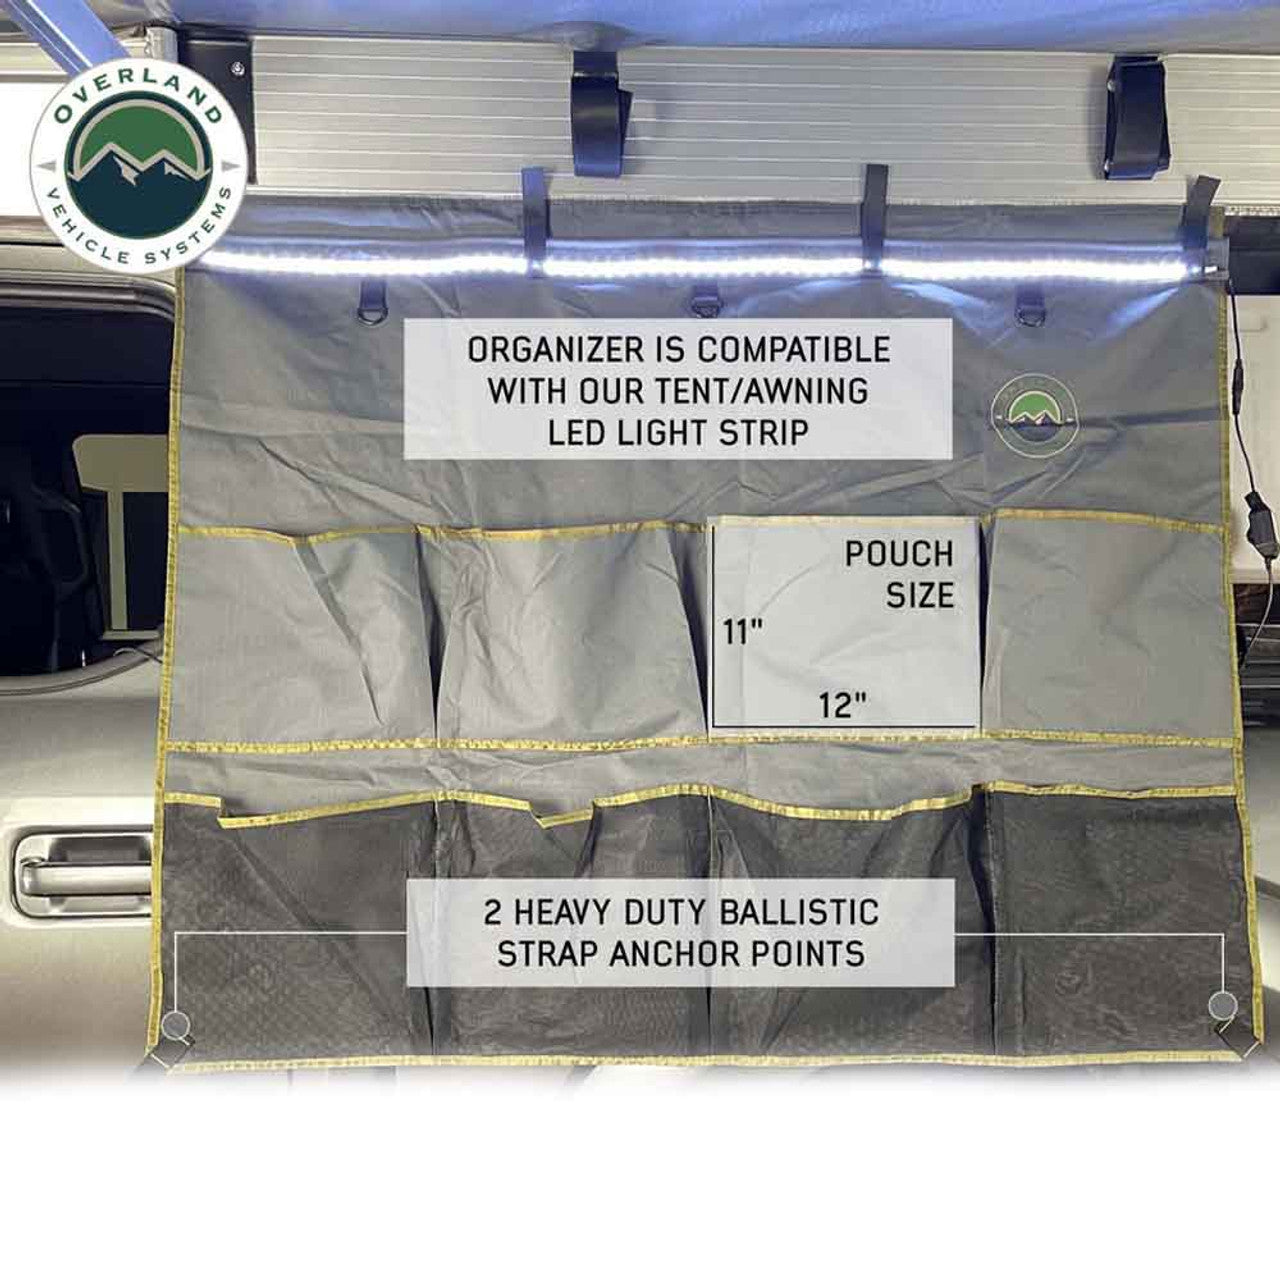 Overland Vehicle Systems Tent and Awning Organizer